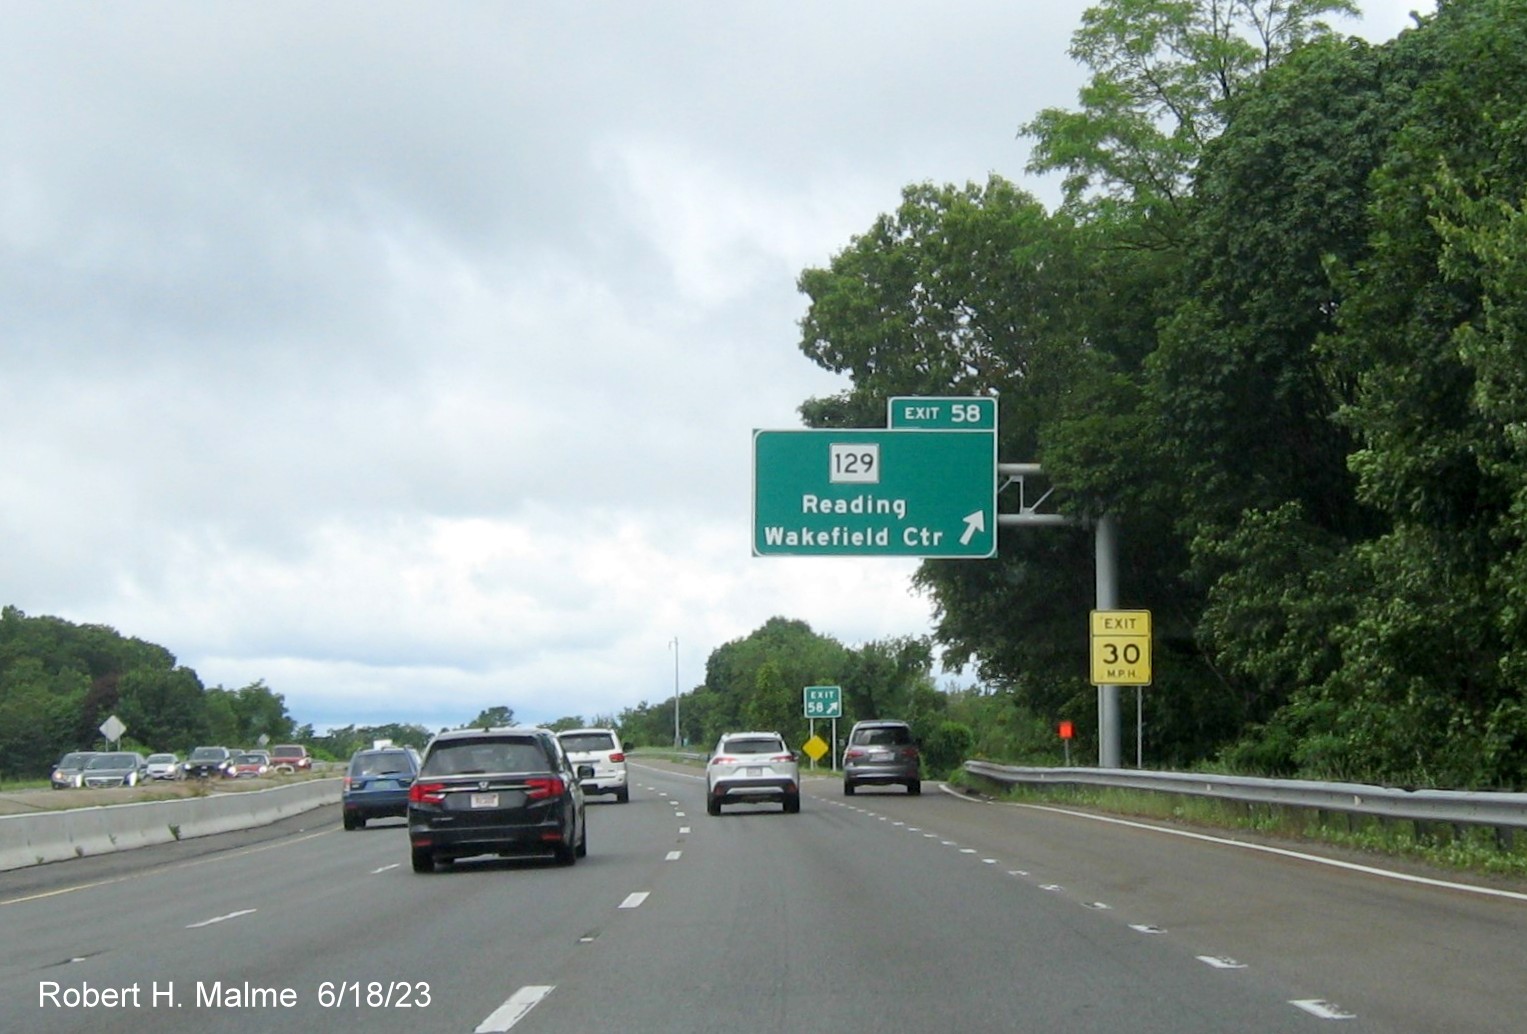 Image of recently placed overhead ramp sign for MA 129 exit on I-95/MA 128 South in Wakefield, June 2023